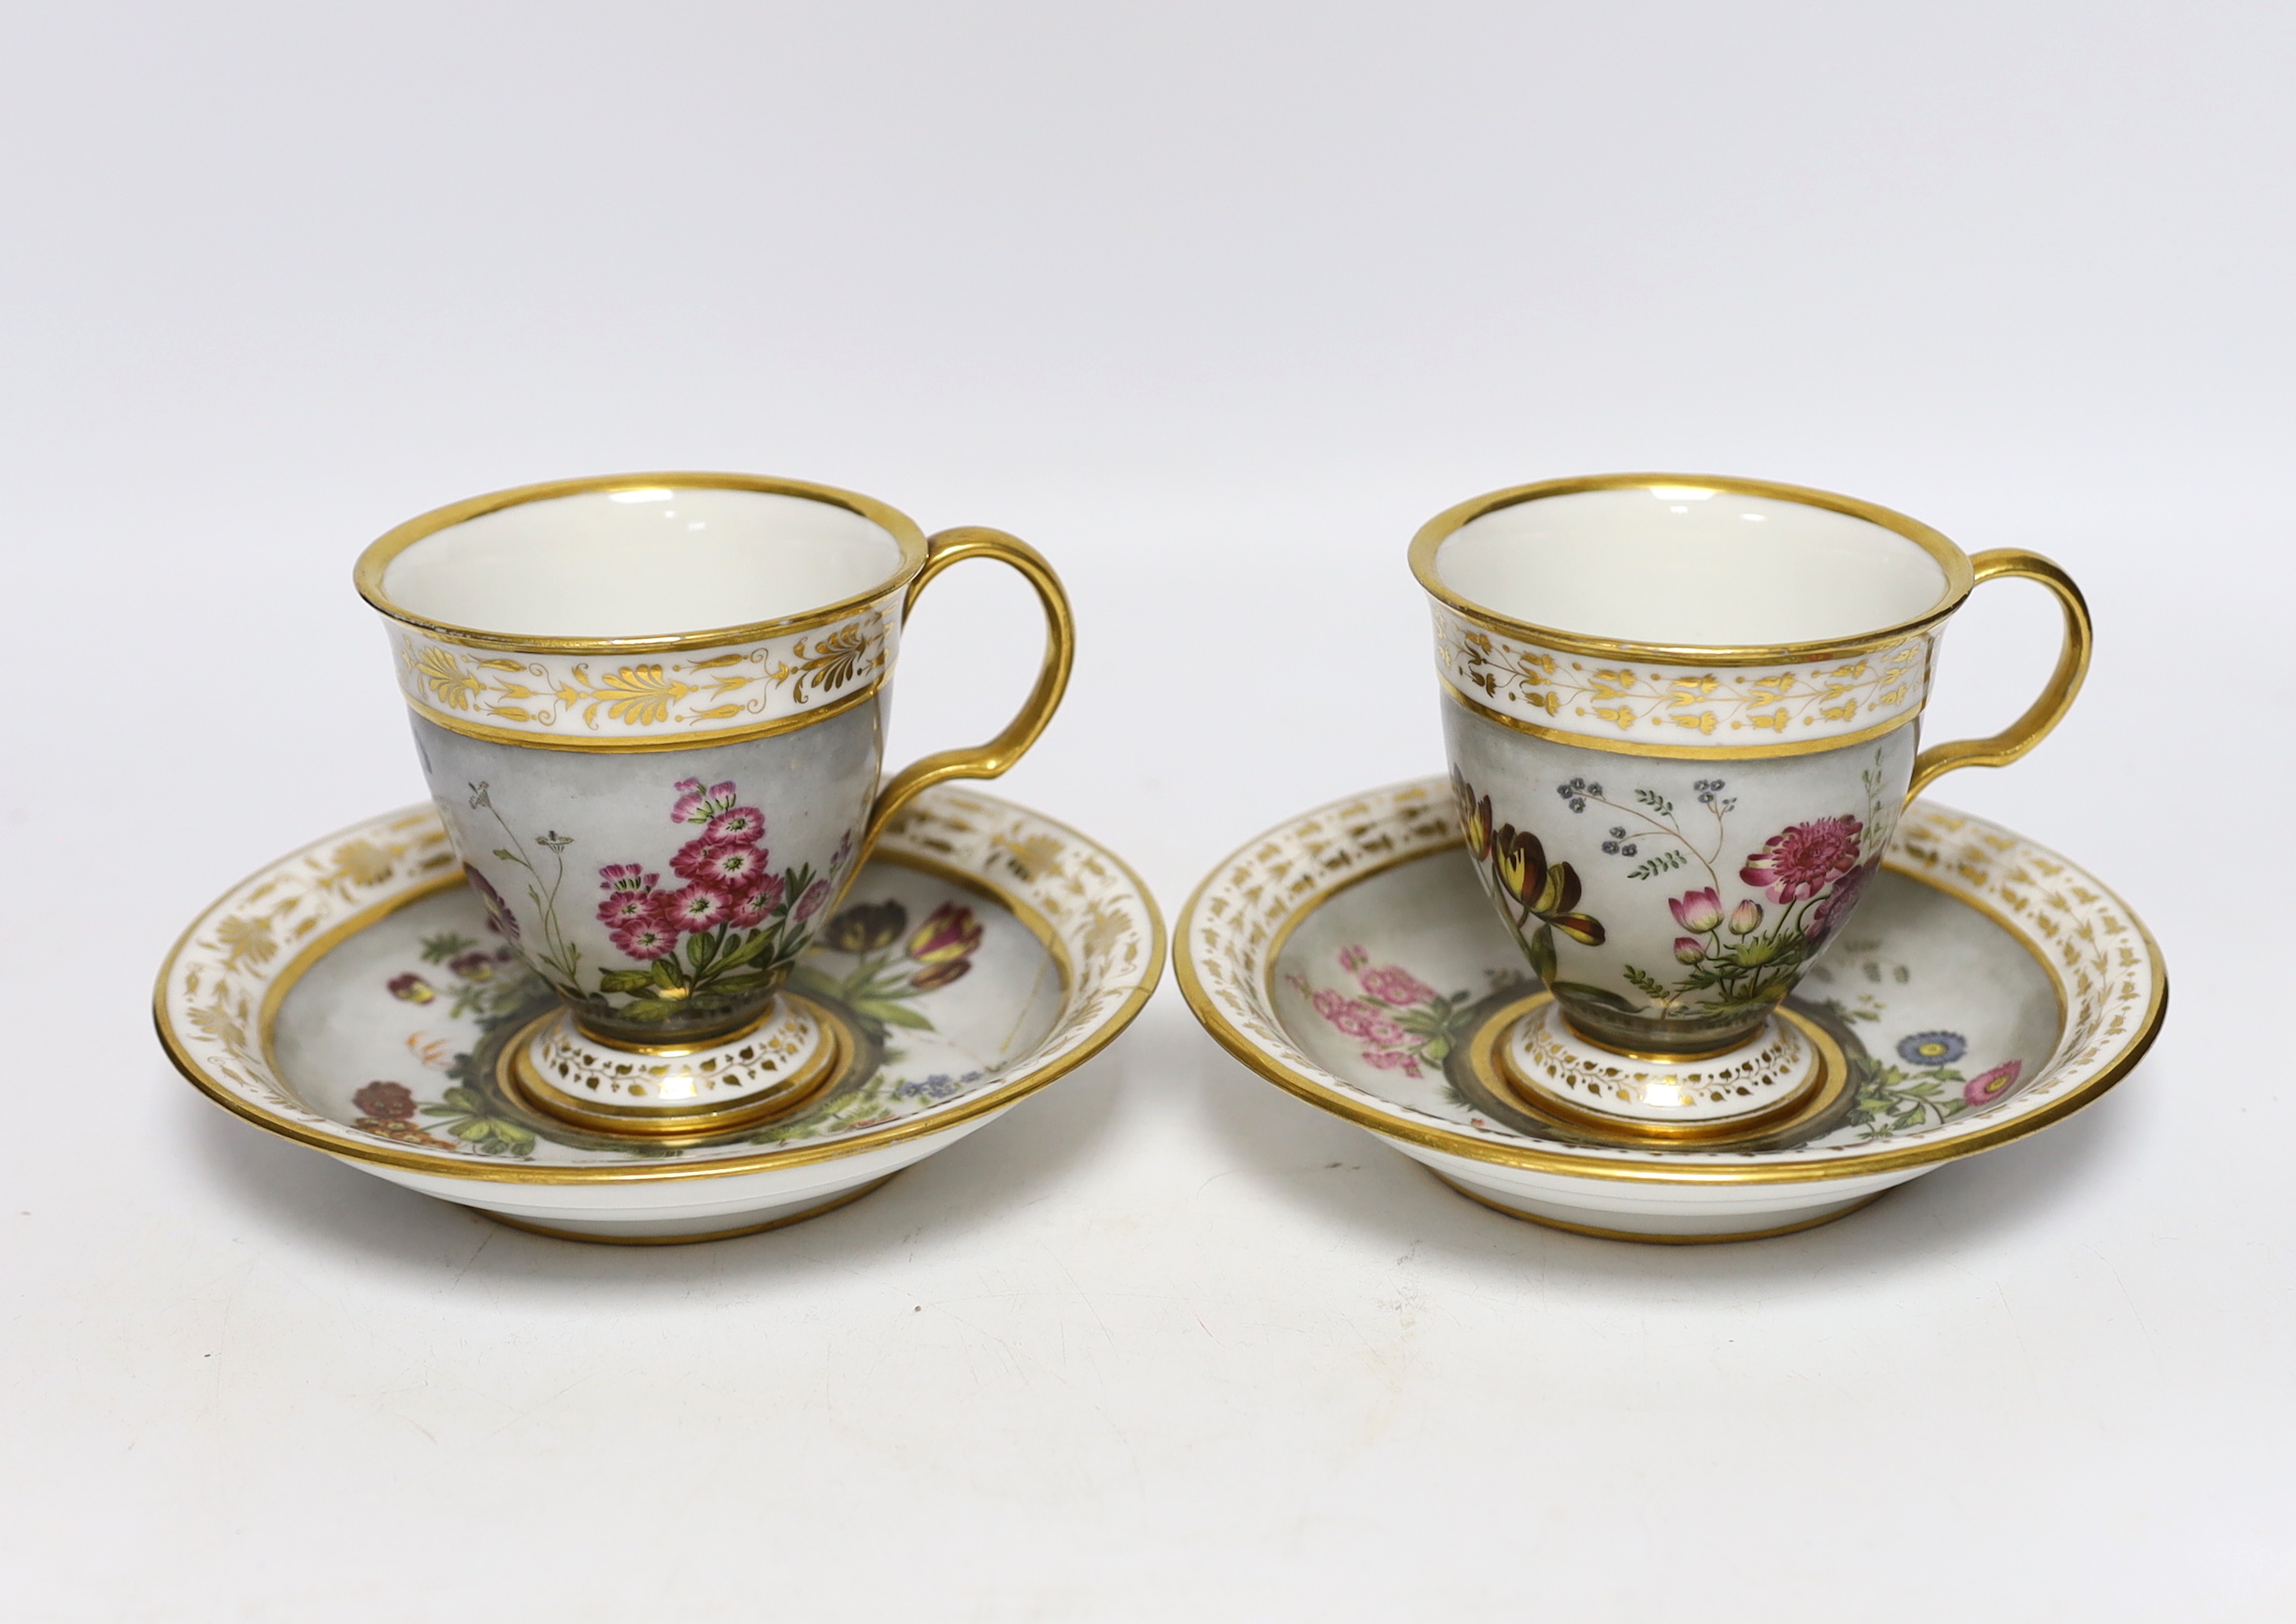 A pair of early 19th century Paris porcelain botanical cups and saucers, one signed Dihl, 9cm high